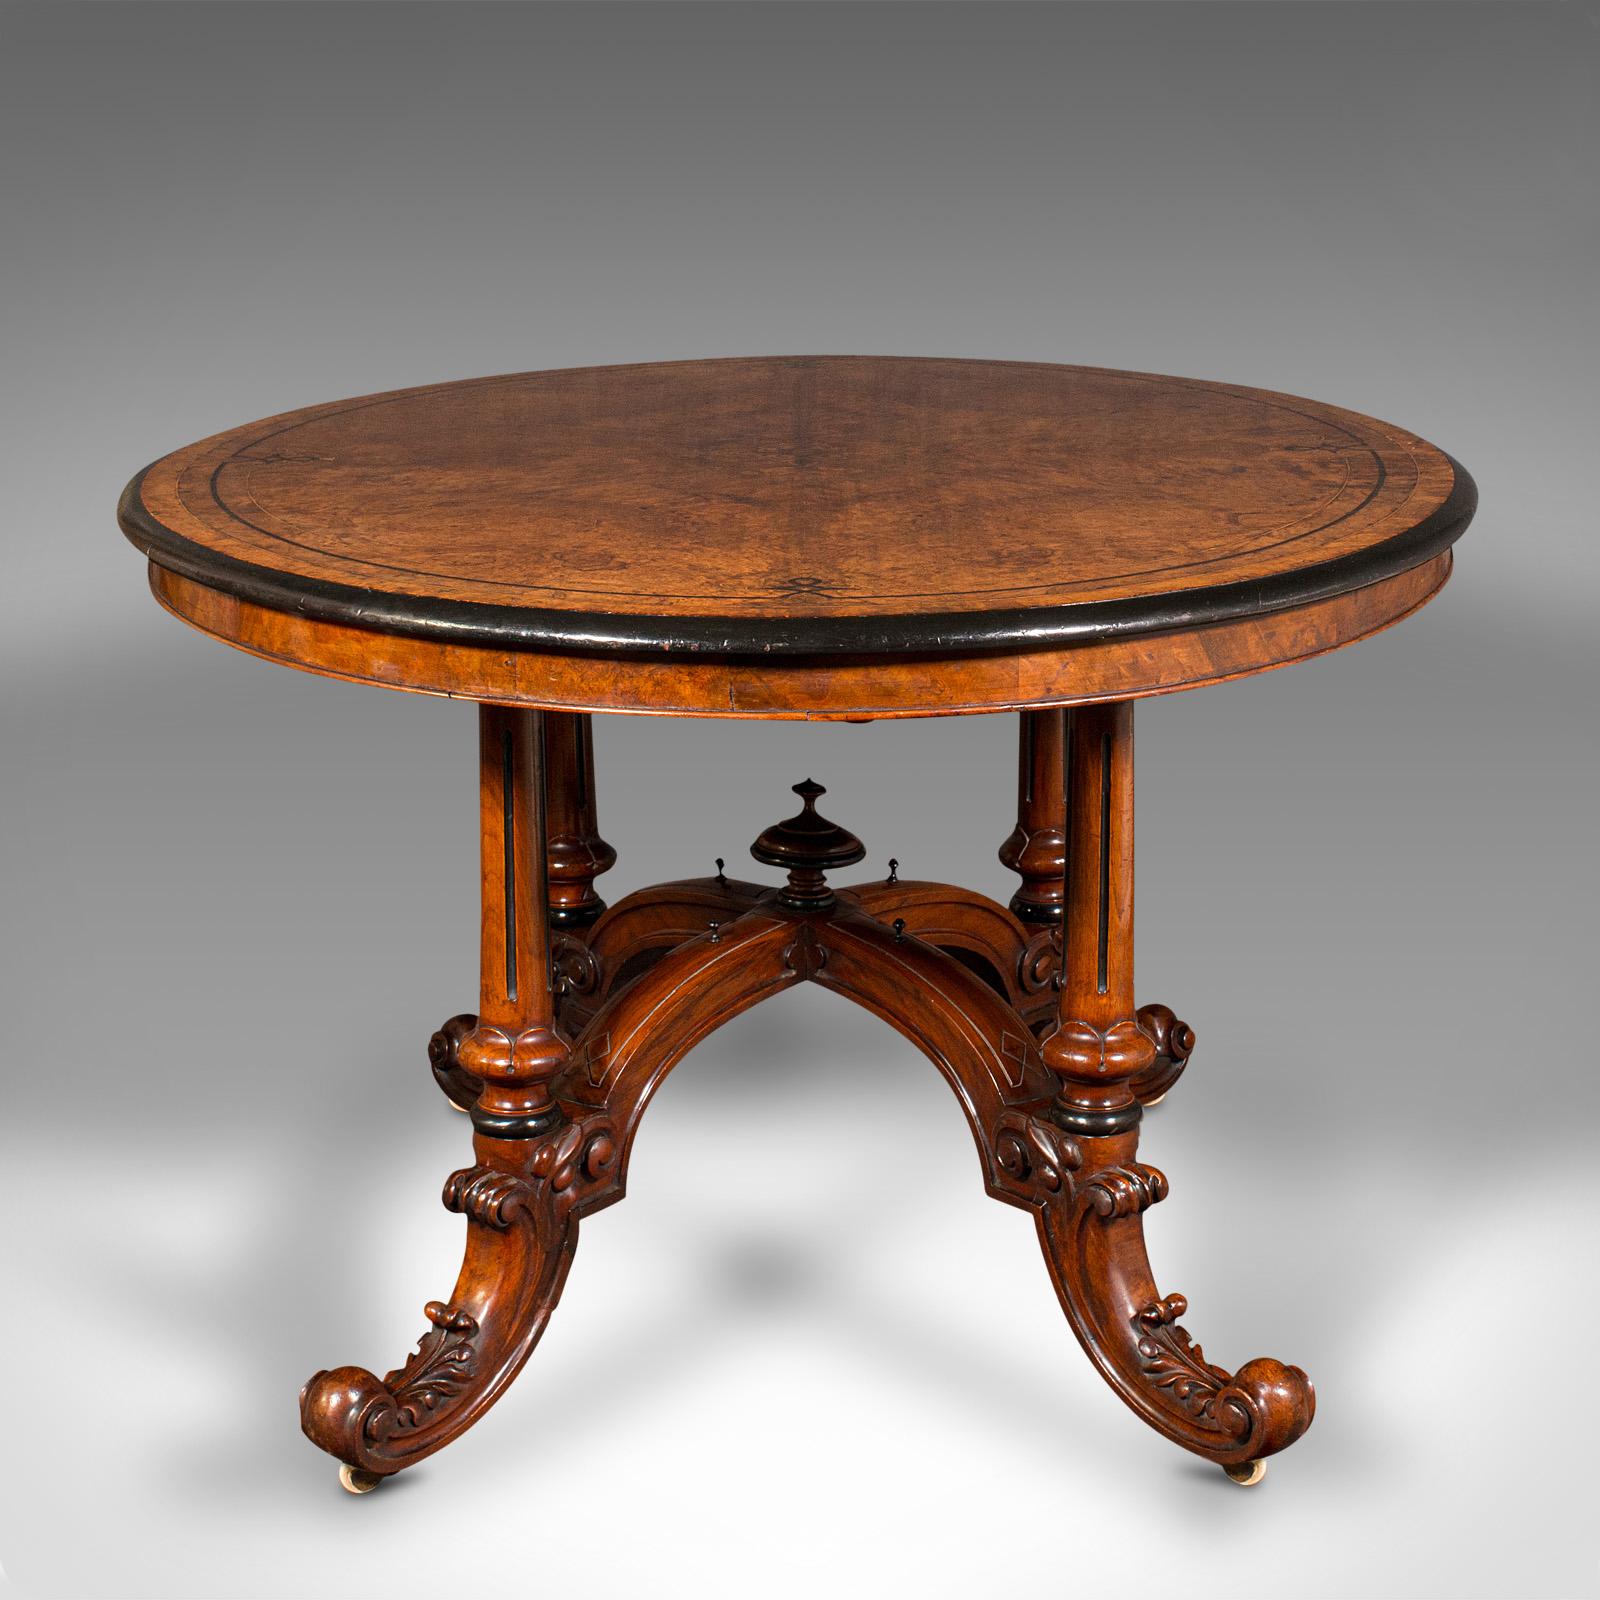 British Antique Oval Looe Table, English, Walnut, 4 Seat, Centrepiece, Early Victorian For Sale